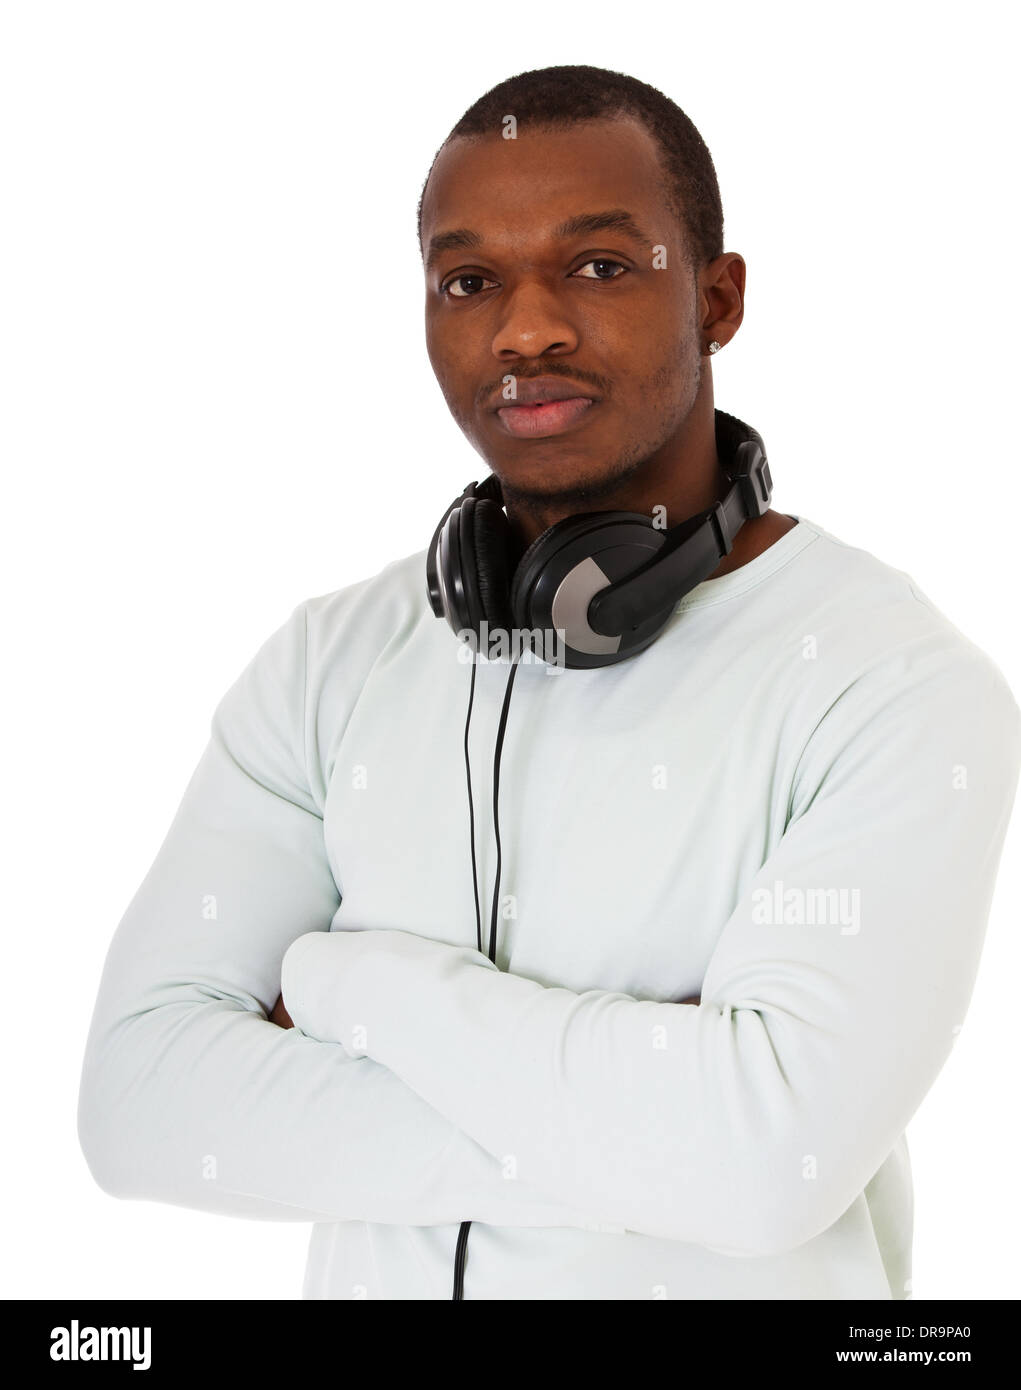 Attractive black guy with headphones. All on white background. Stock Photo